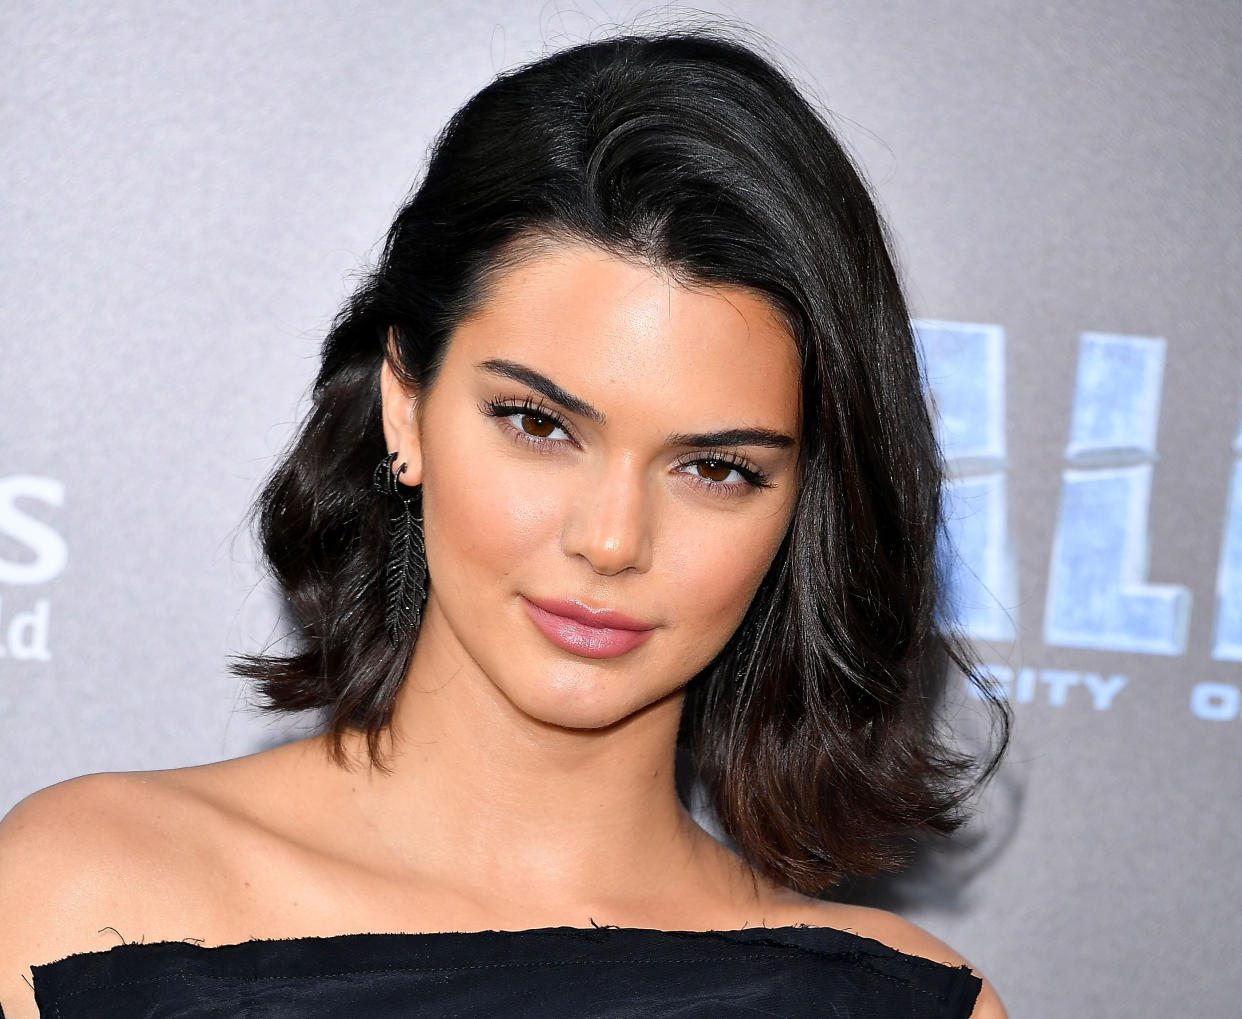 Kendall Jenner got called out on Twitter for her choice of emoji